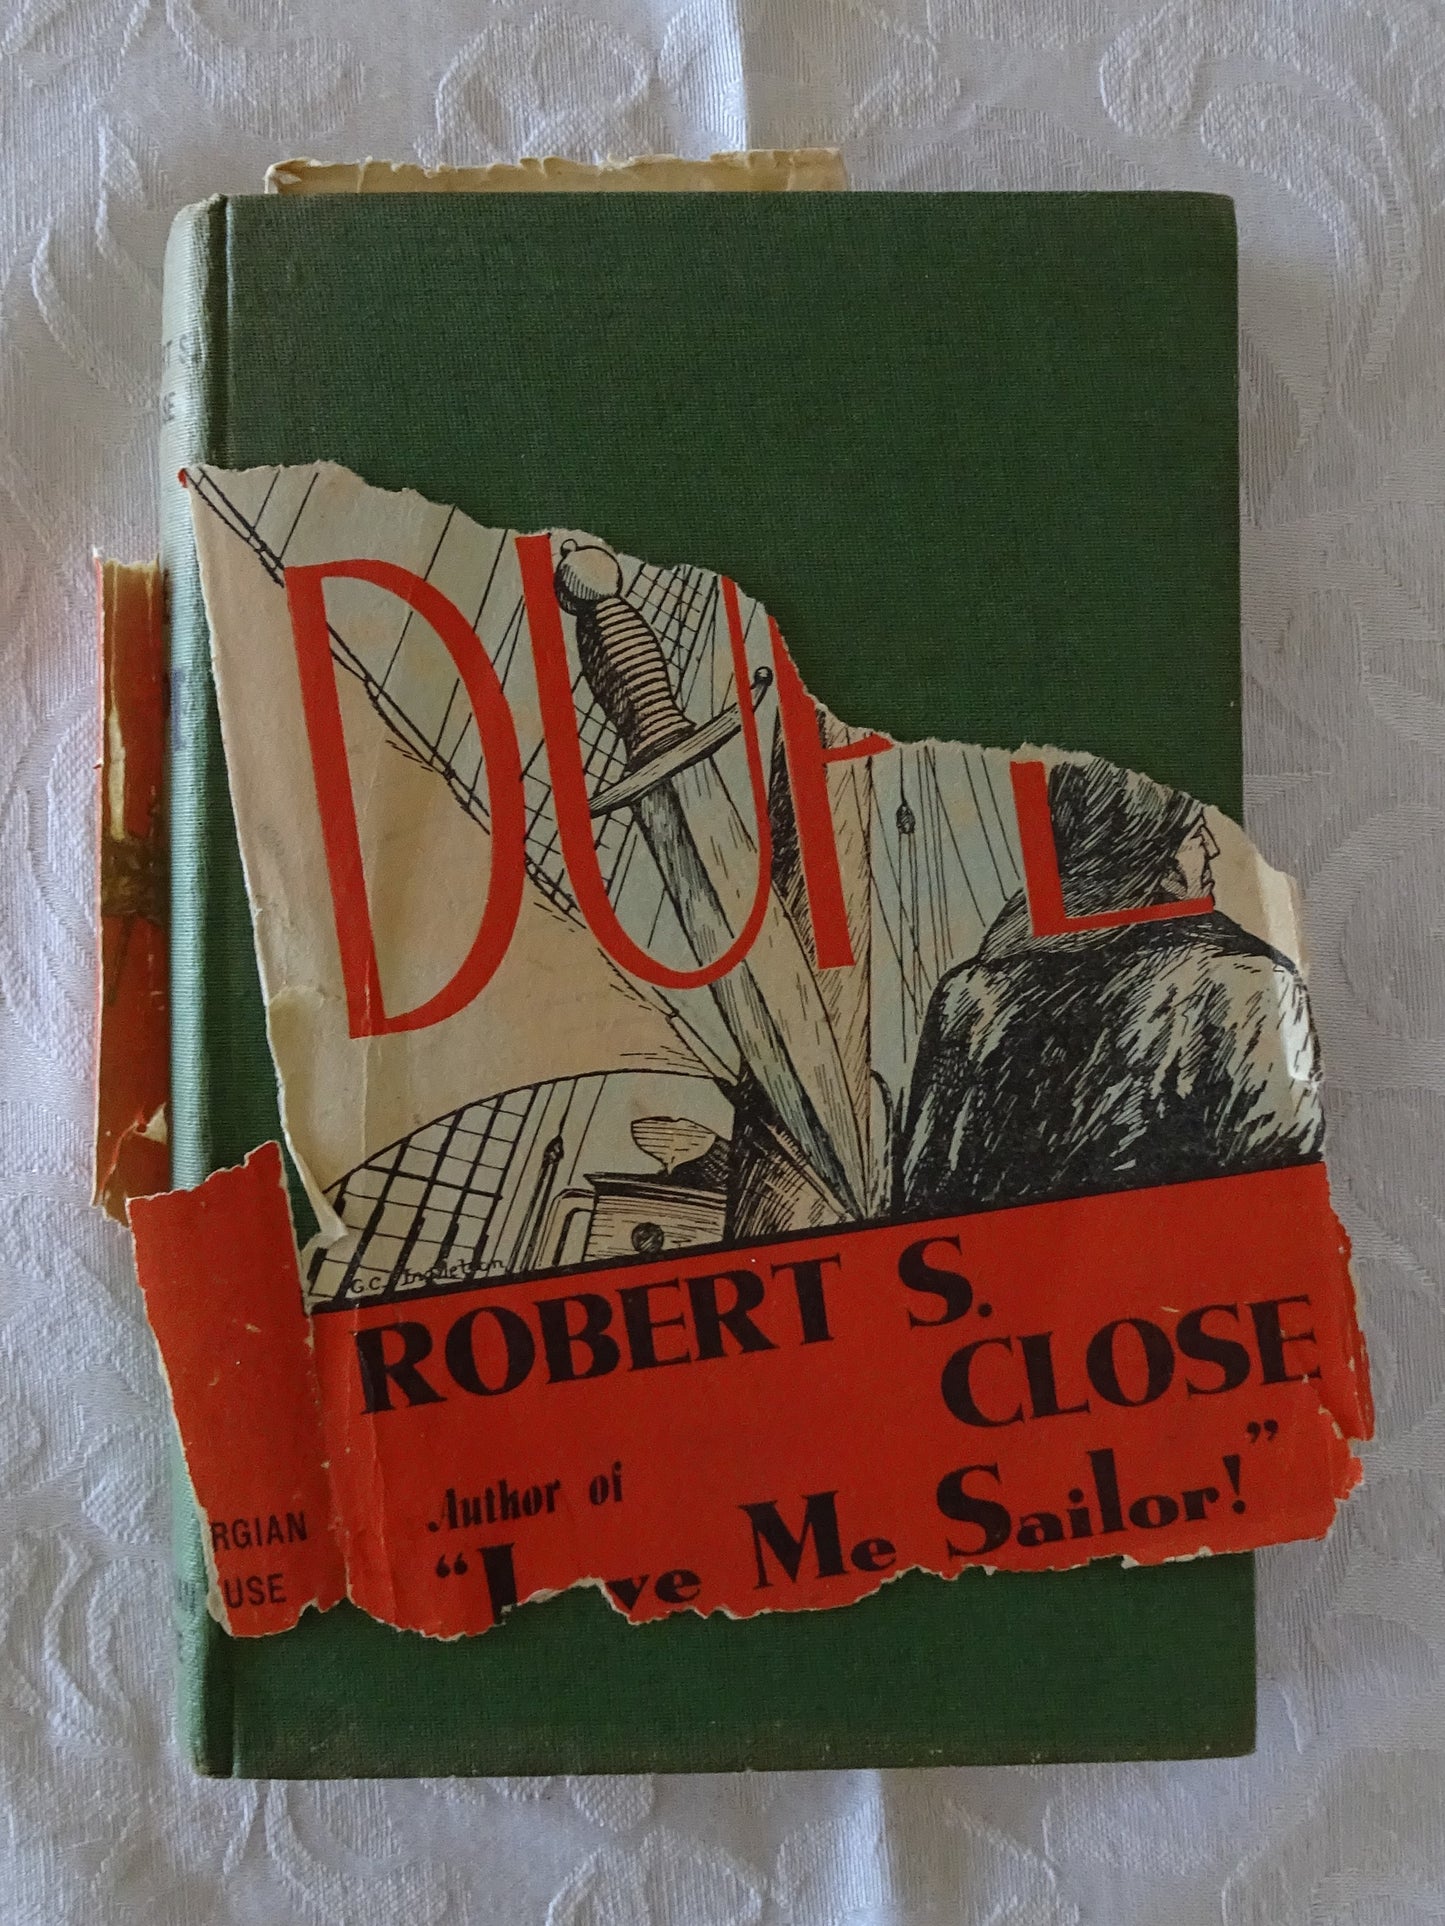 The Dupe by Robert S. Close